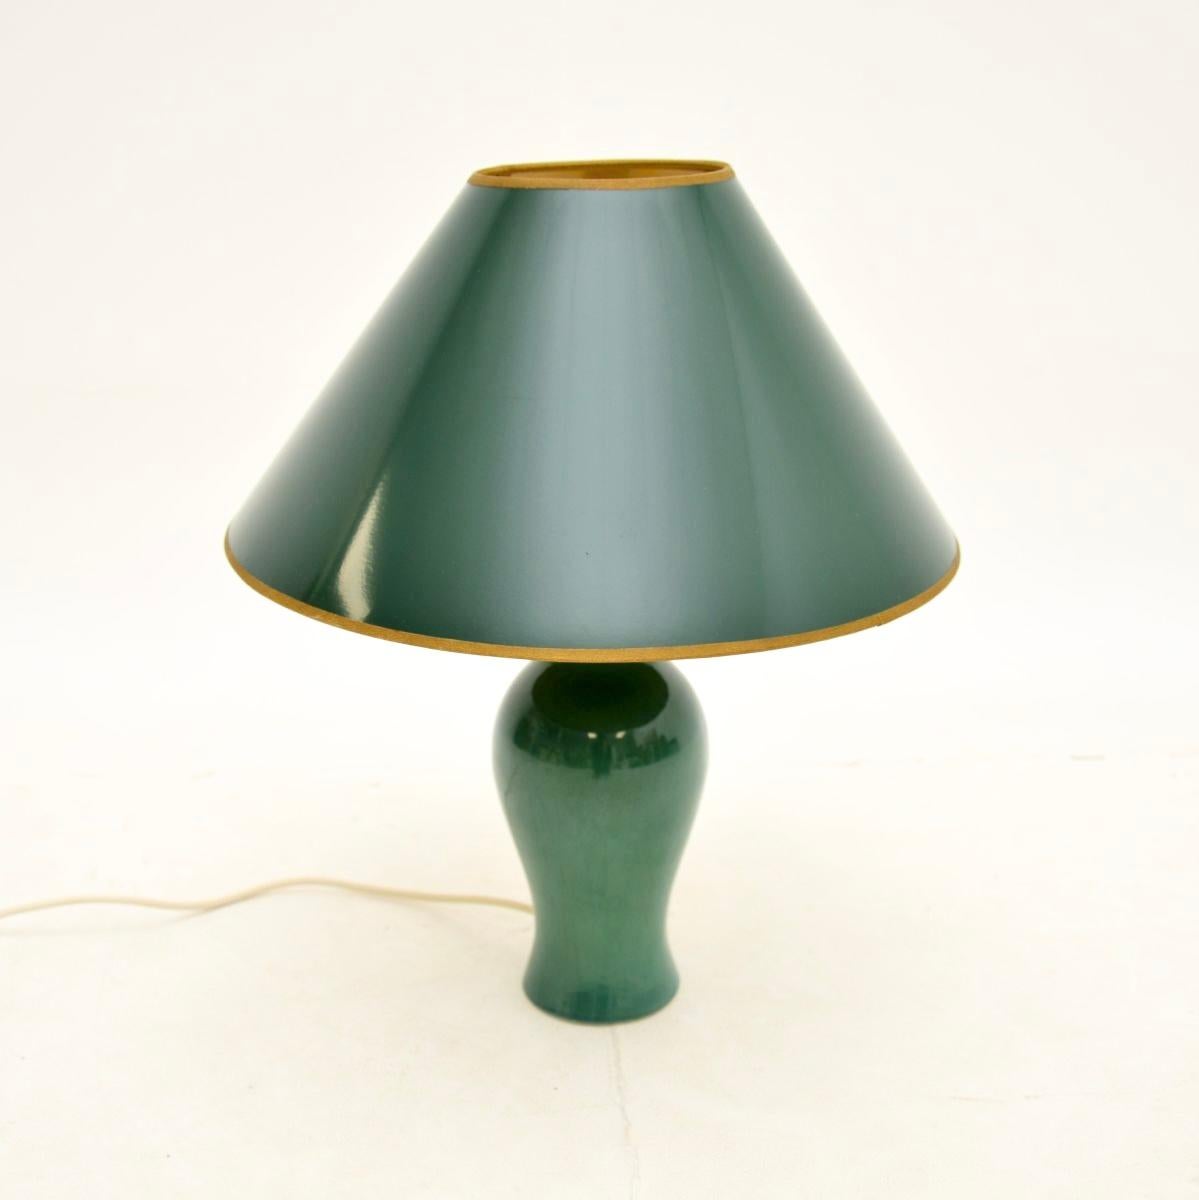 A gorgeous vintage ceramic table lamp, made in England and dating from around the 1970’s.

It has a stunning green glaze, it is beautifully shaped and is a lovely size. The green conical shade is original and compliments the lamp very well.

The